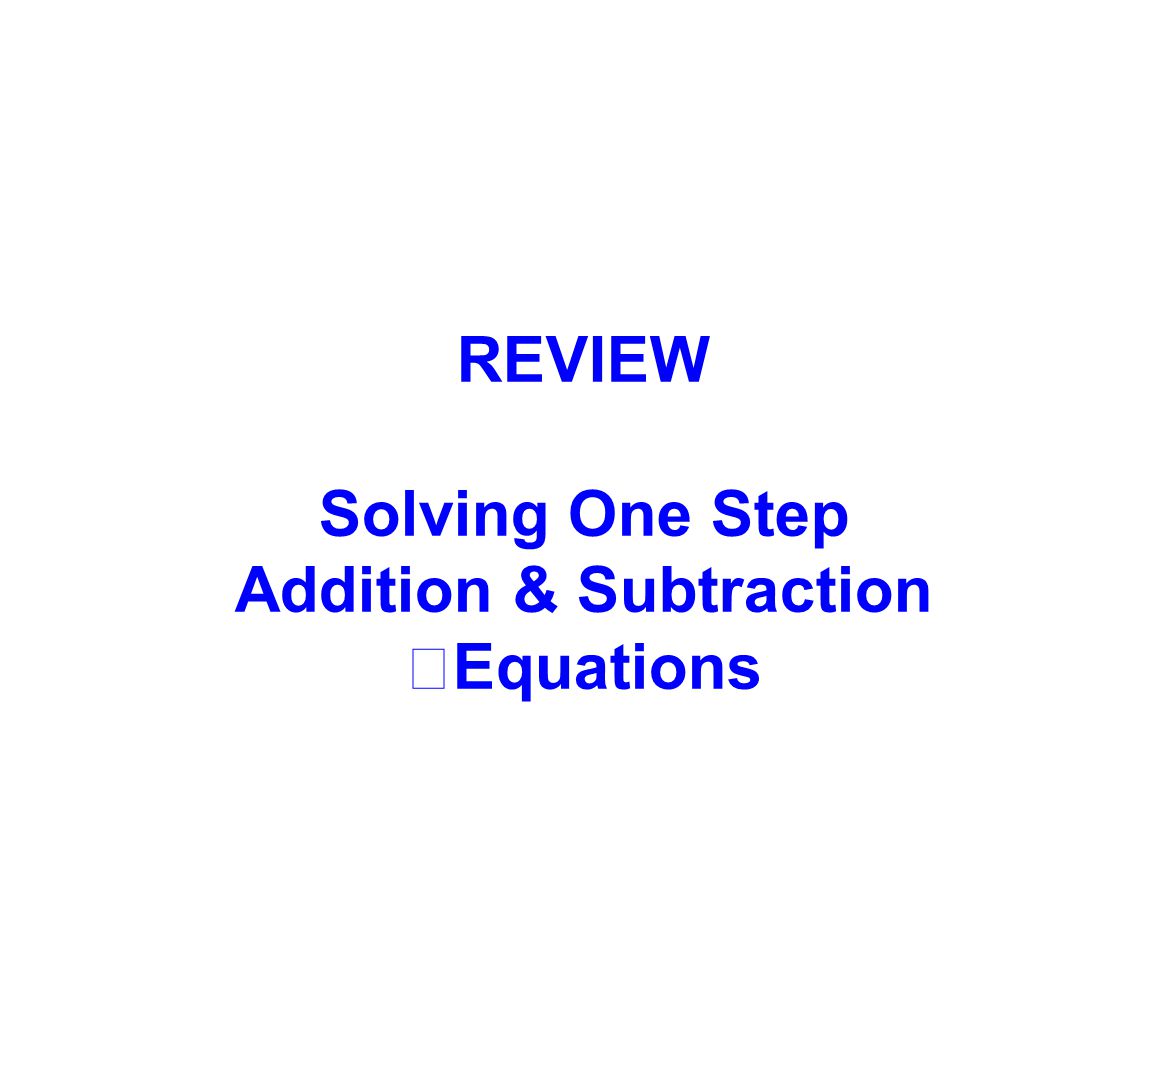 Addition & Subtraction Equations